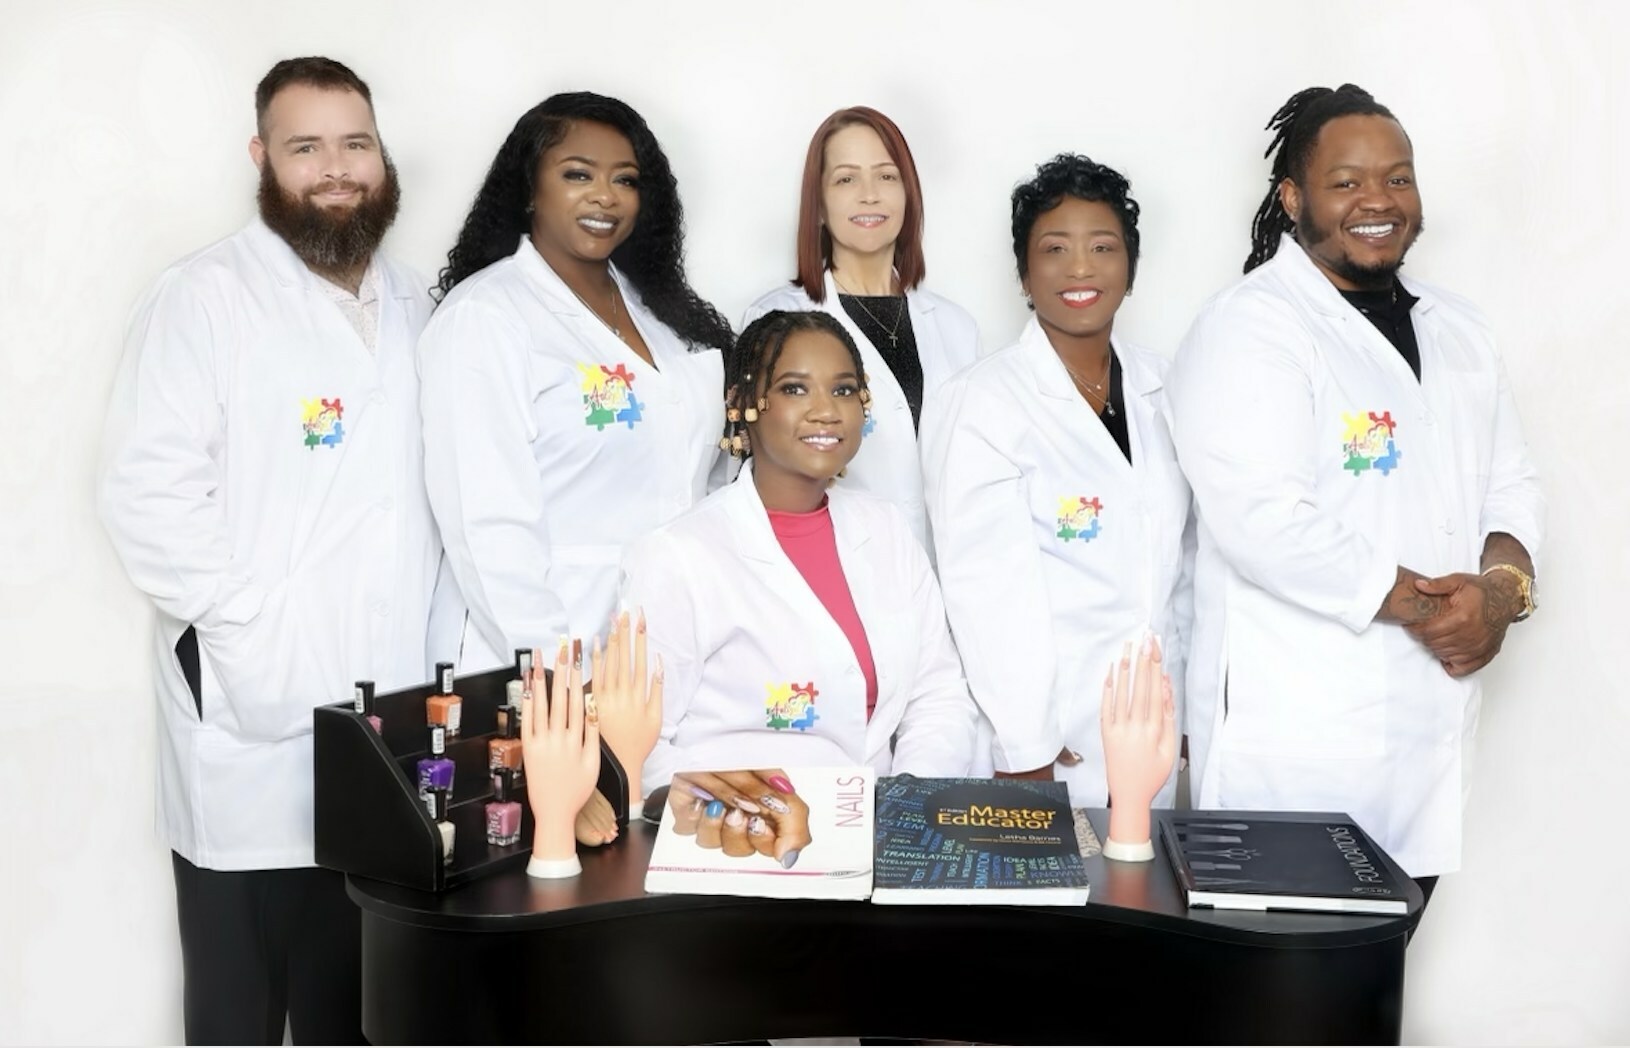 Aaliyah Thompson (seated) with her team from Aaliyah's Beauty Bar, an inclusive salon offering hair, nail and make-up services for all women. 